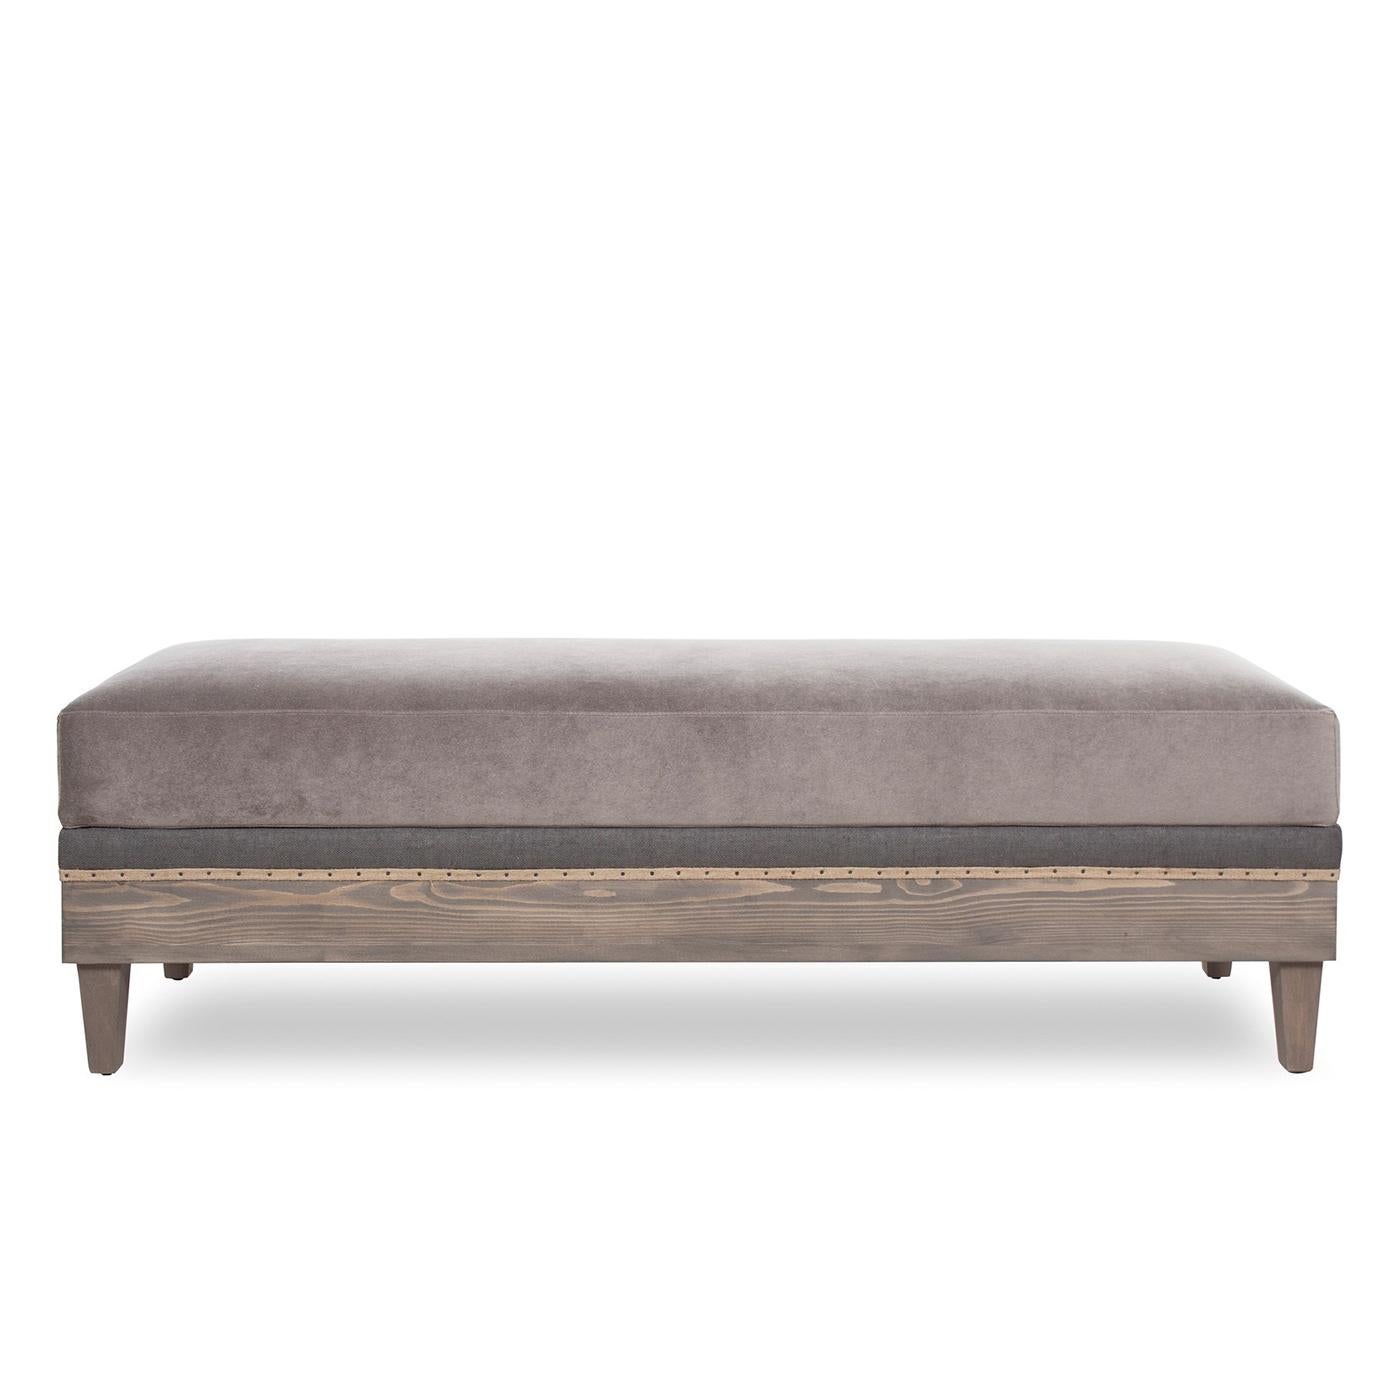 Bench Roca with structure in solid beech wood, upholstered and
covered with high quality velvet fabric in grey color. Bench with 
burlap and nailed burlap trim with black steel nails.
Also available with other velvet colors, on request.
Also